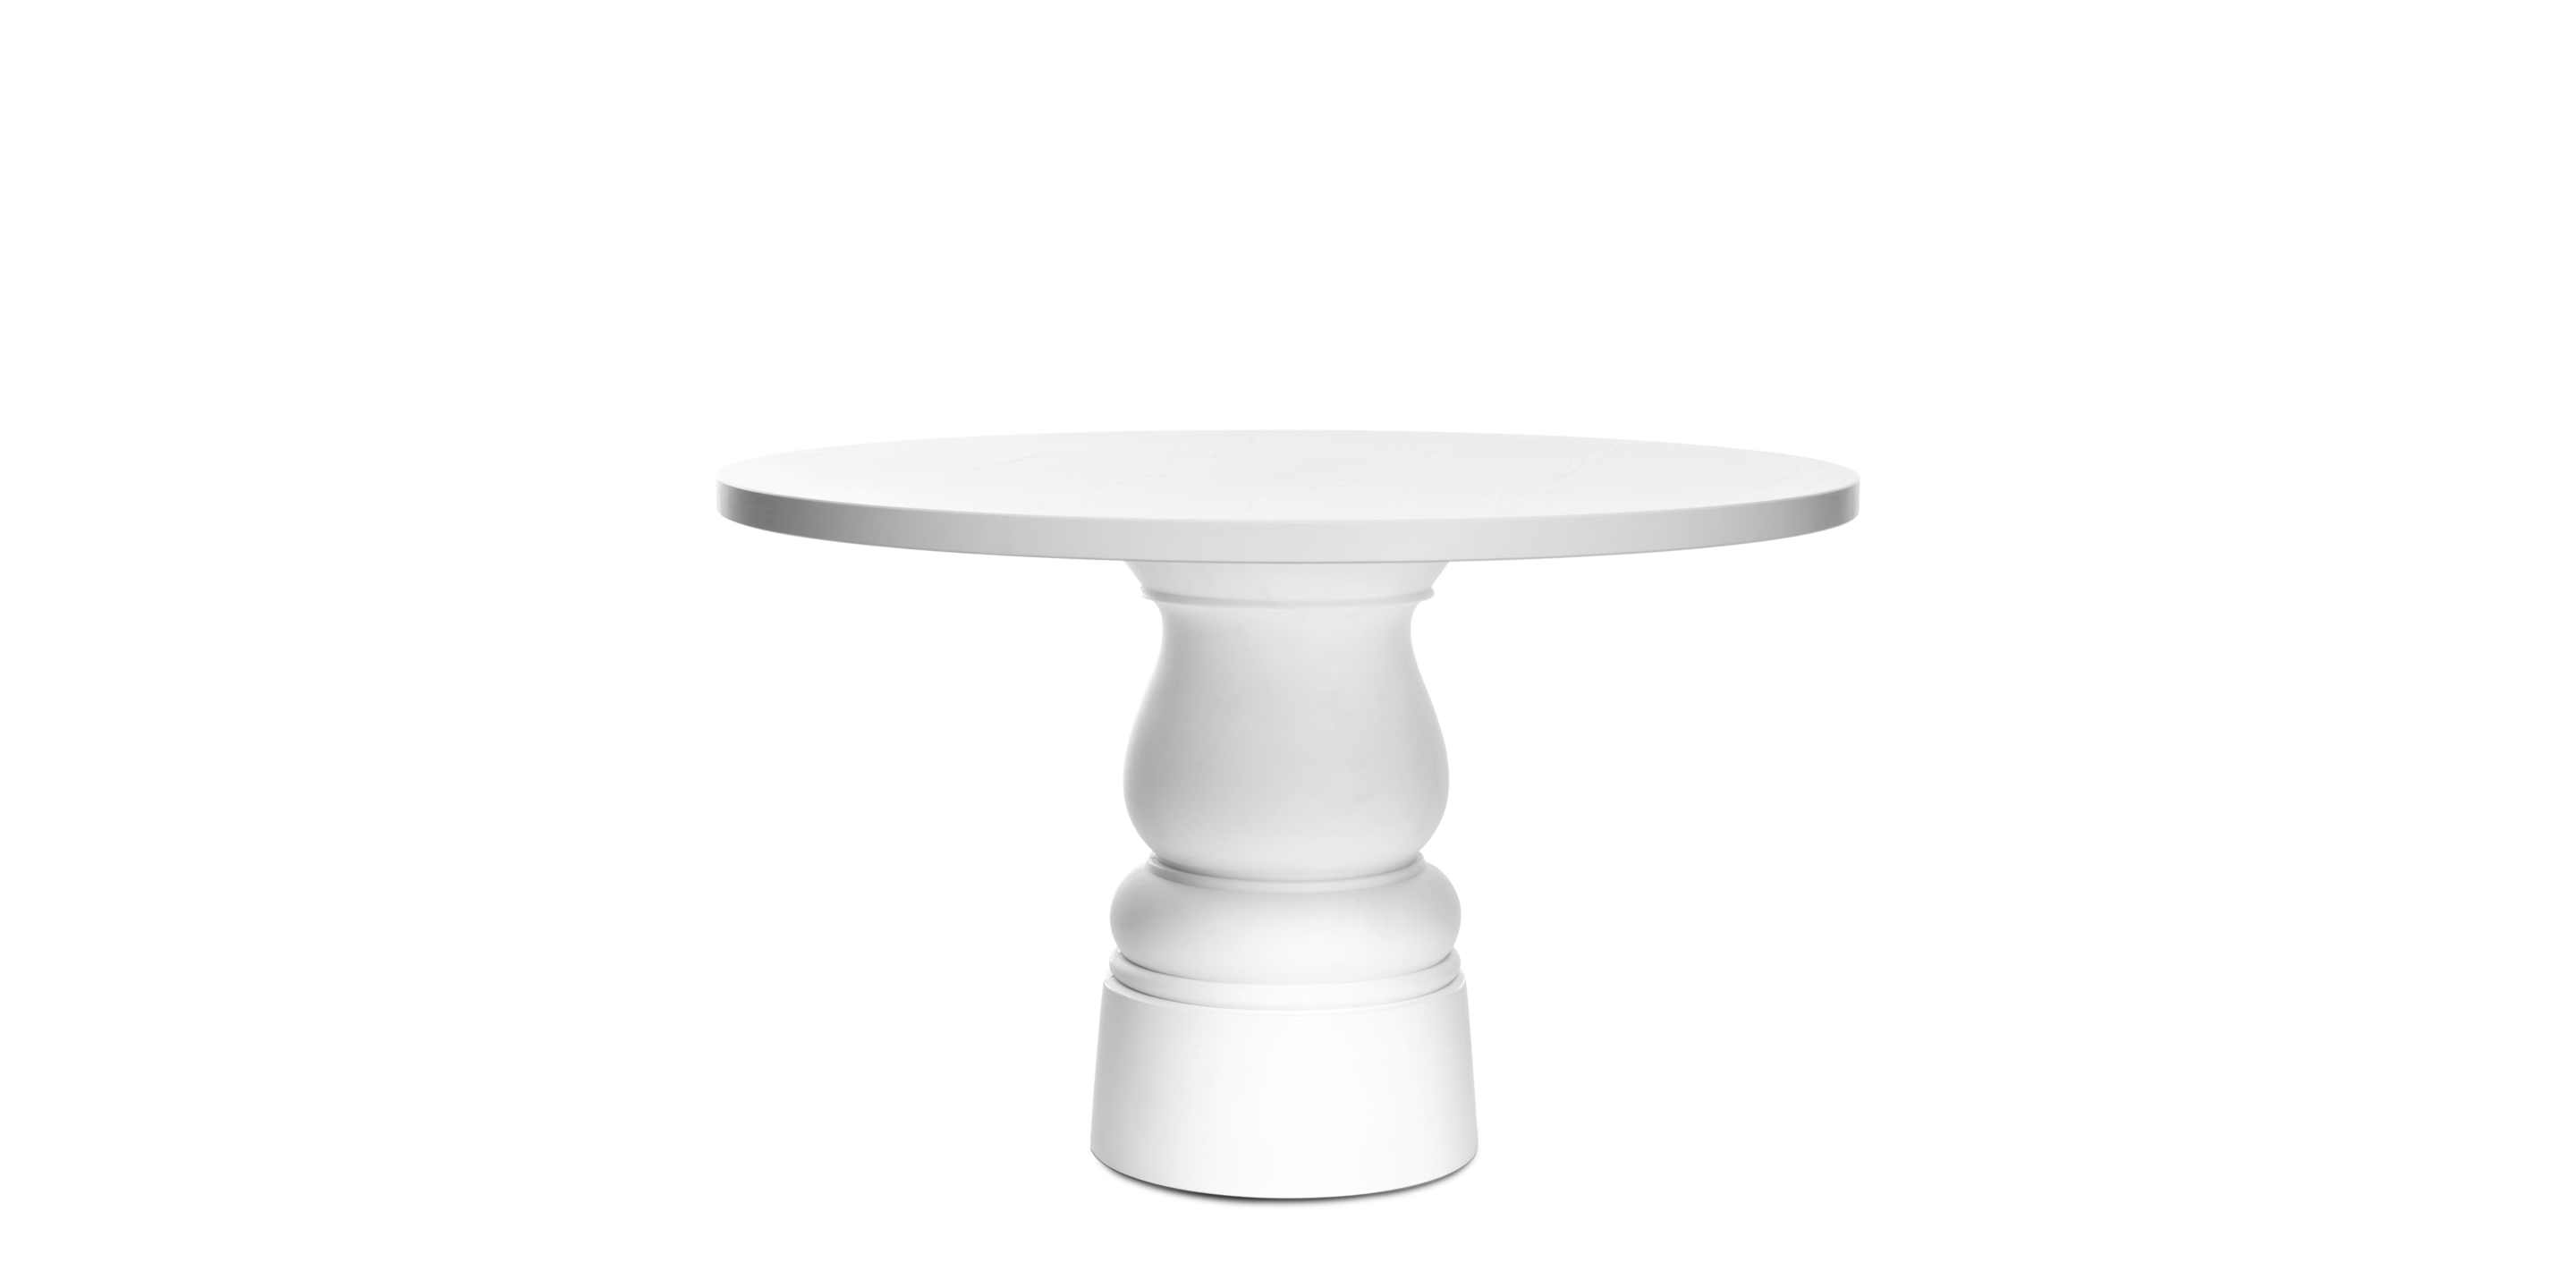 Container Table New Antiques round white